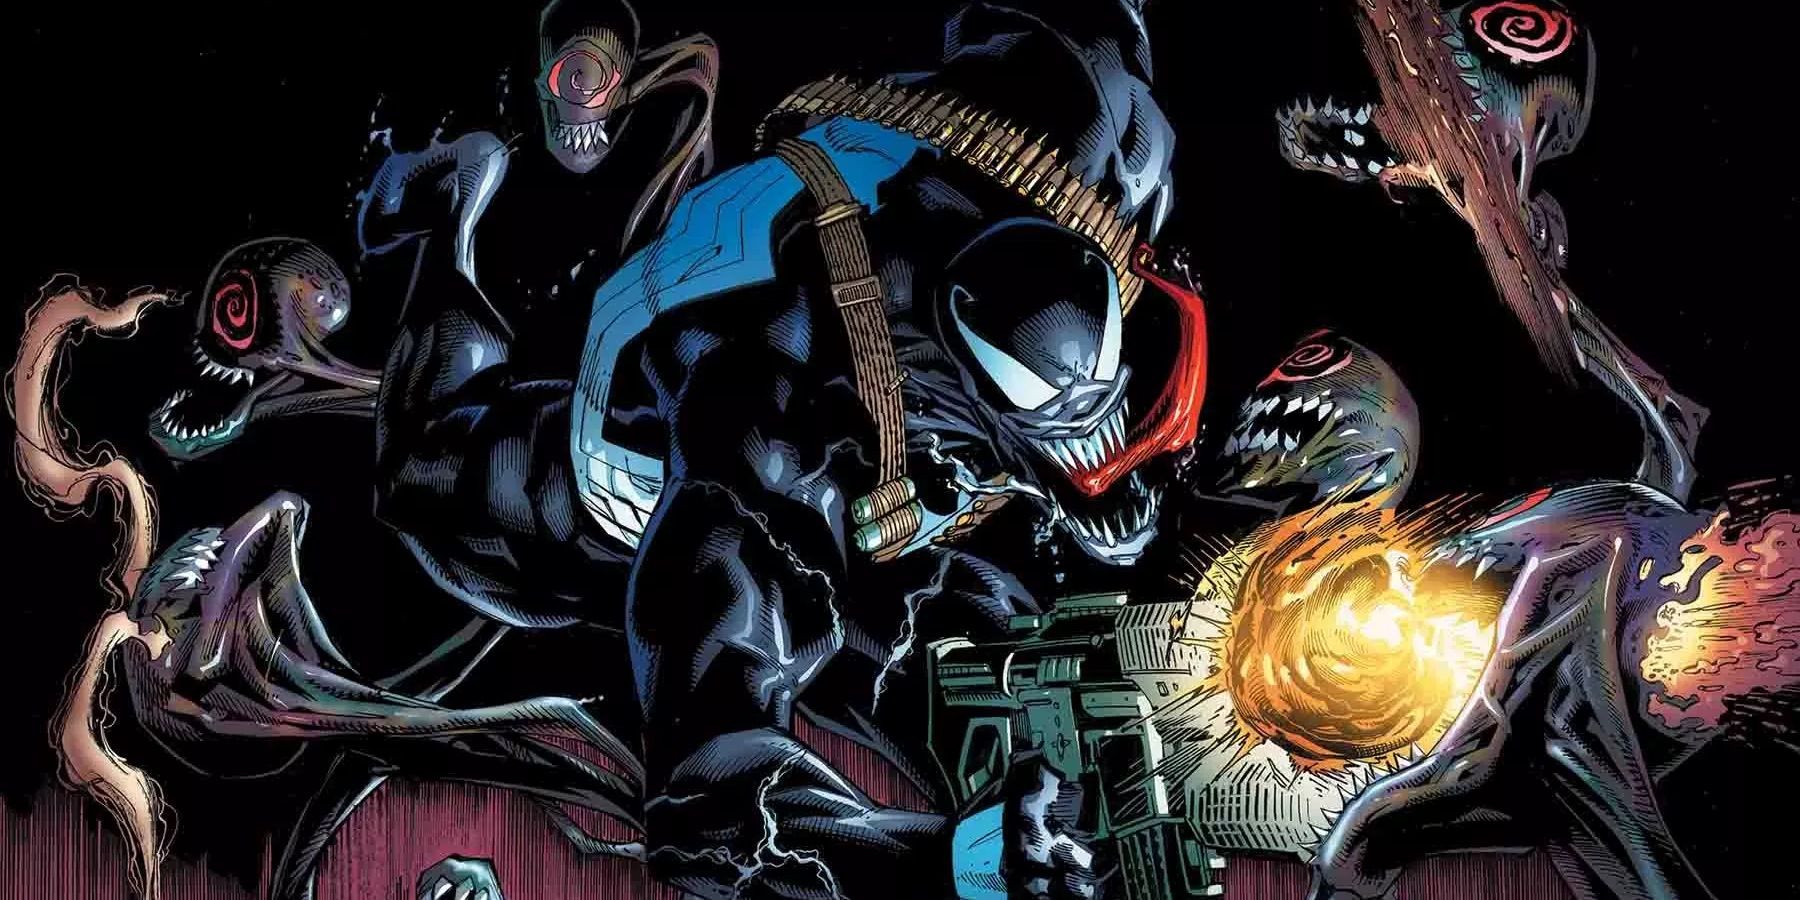 Venom fights and enemy with an automatic weapon and sleeve of bullets in Marvel comics